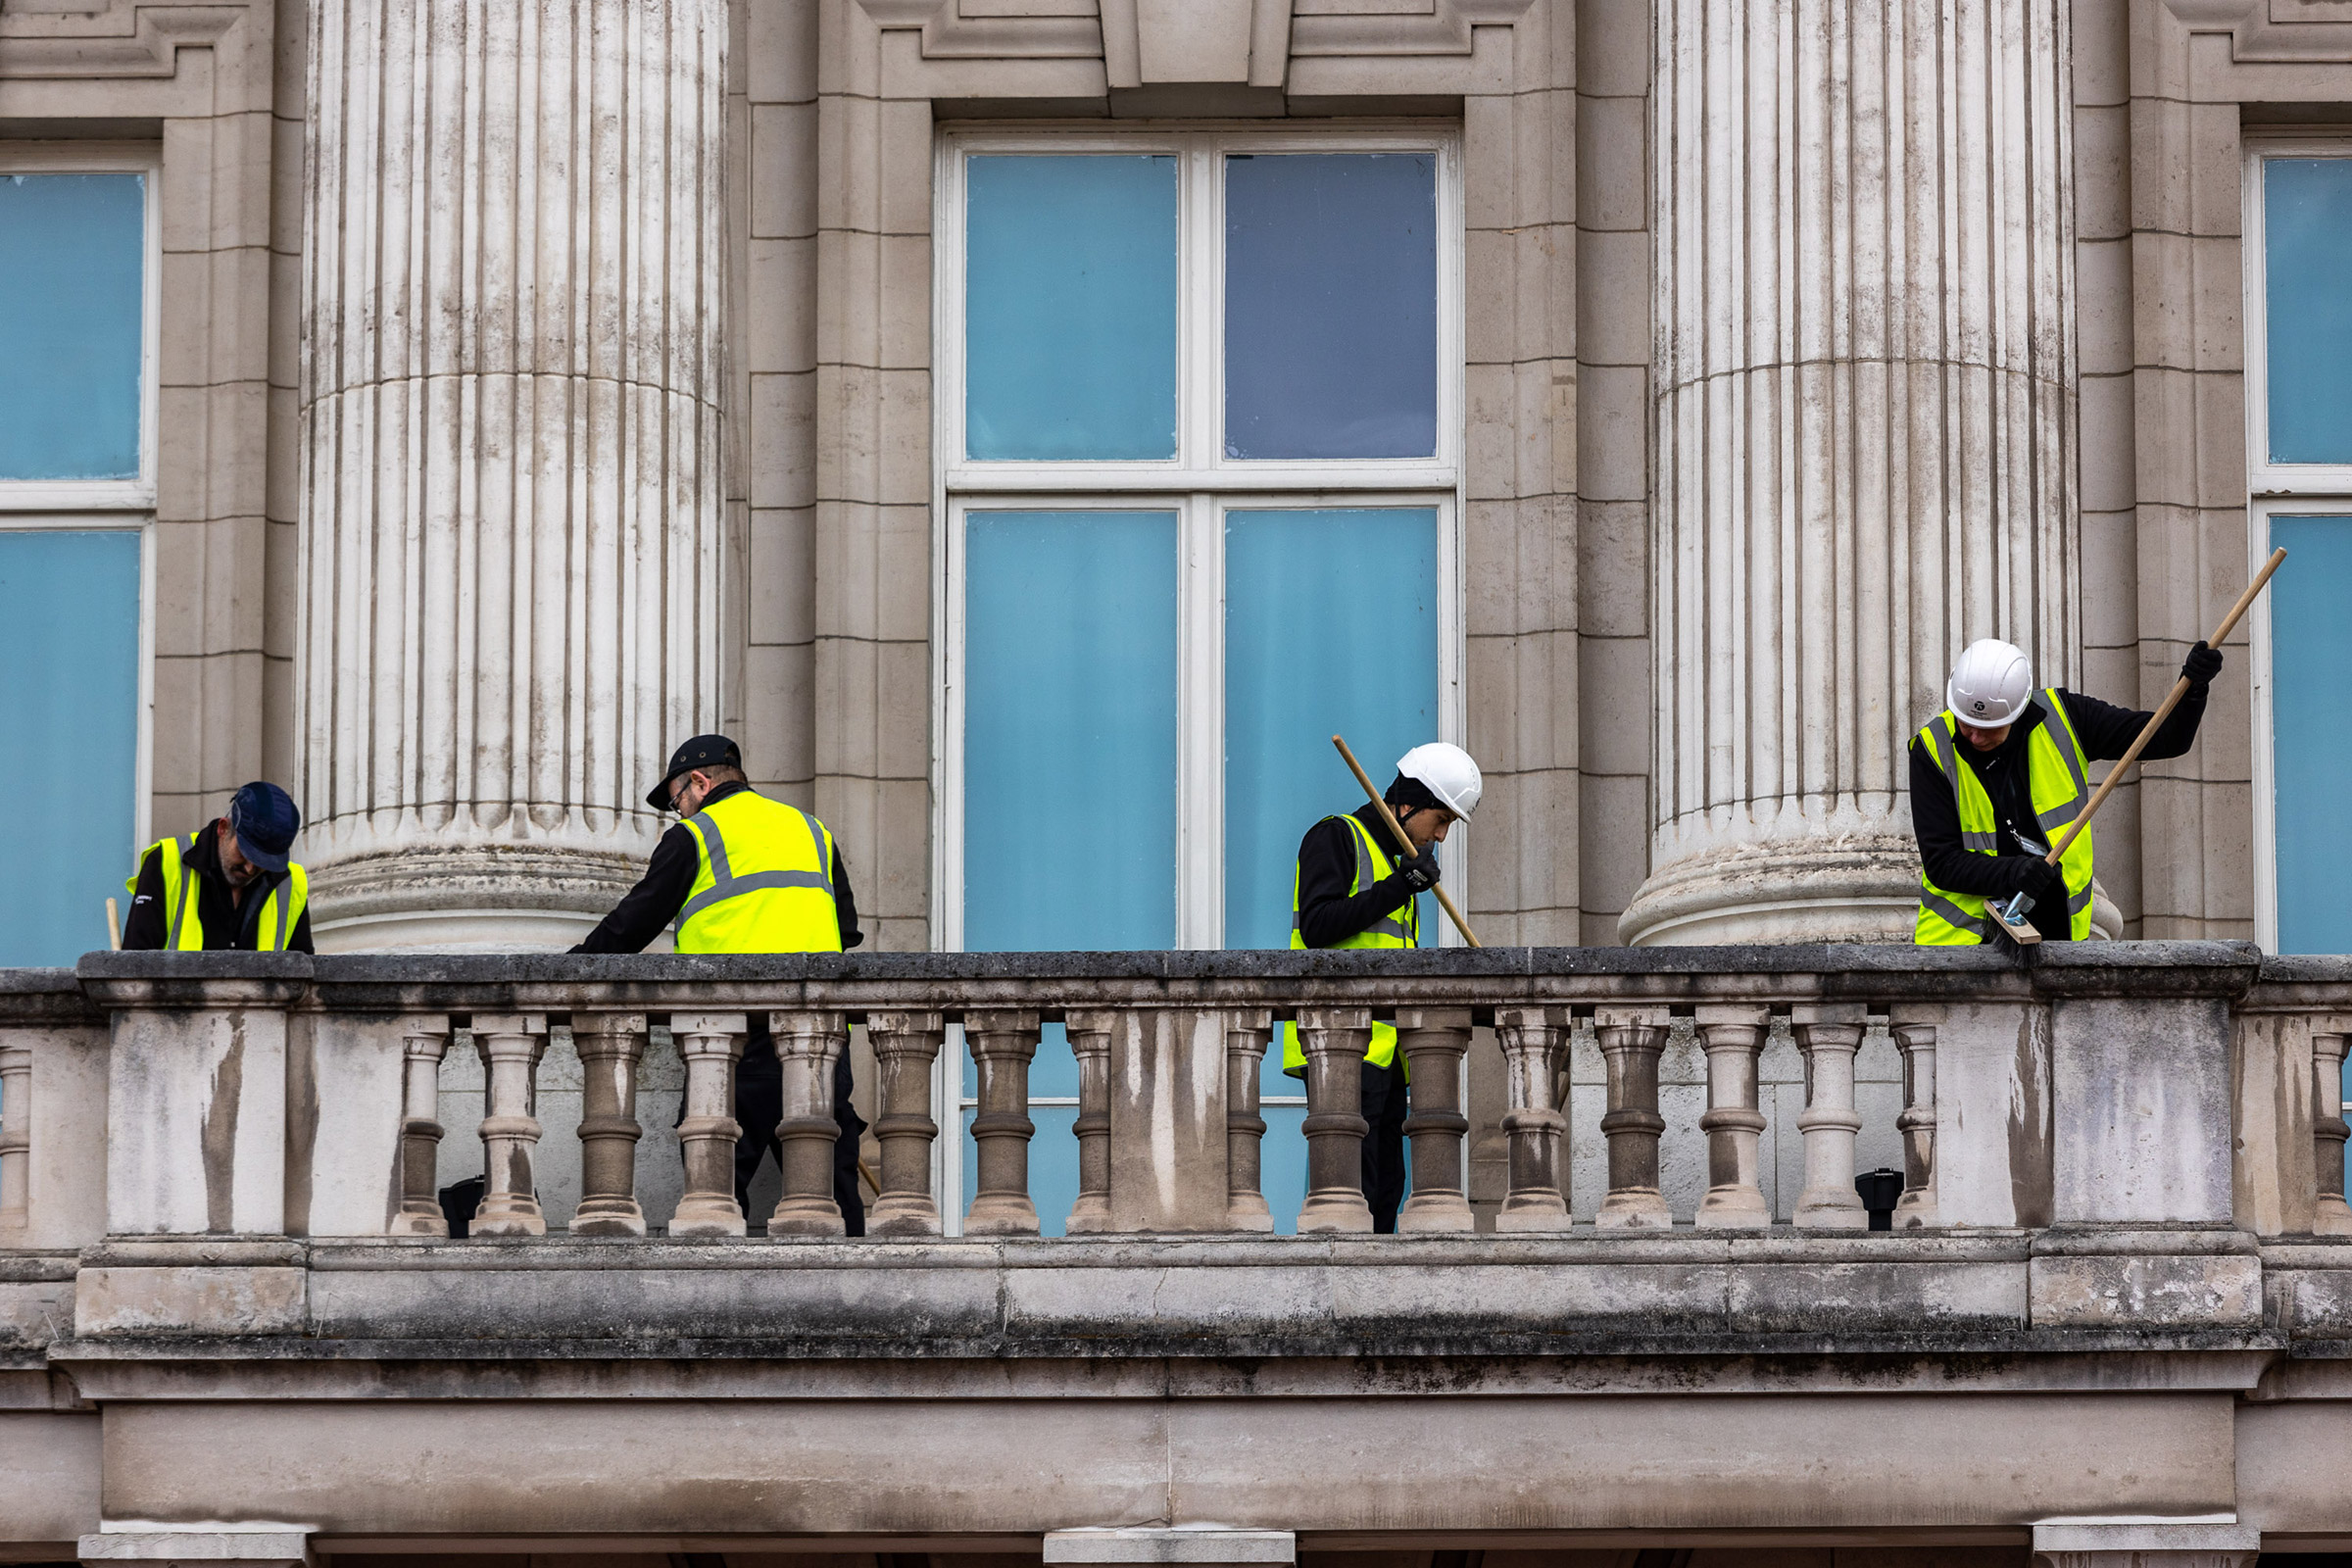 The balcony of Buckingham Palace is cleaned before the coronation on 18 April.  (Marcin Nowak-Shutterstock)